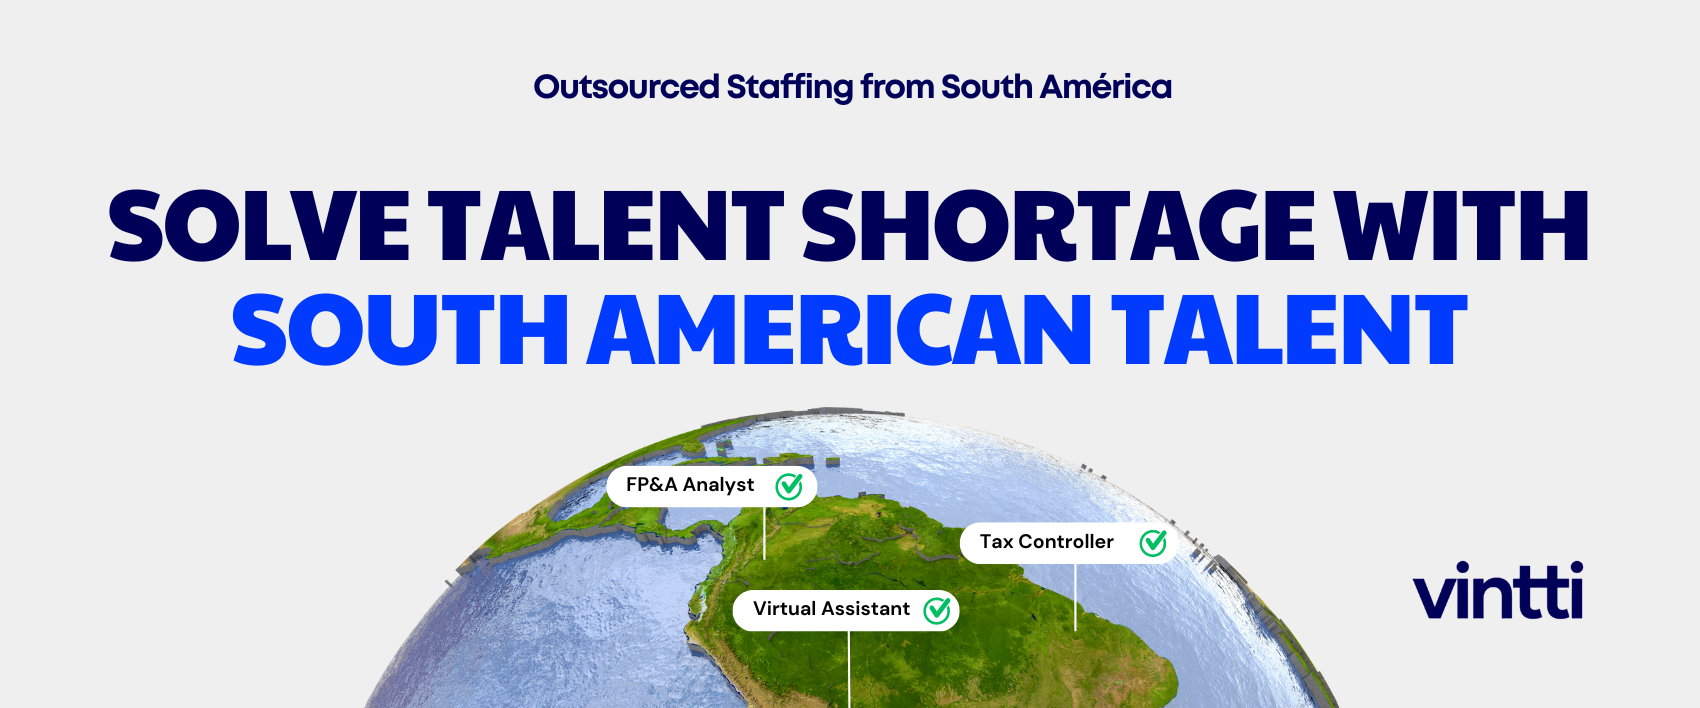 CTA Vintti Offshore Staffing